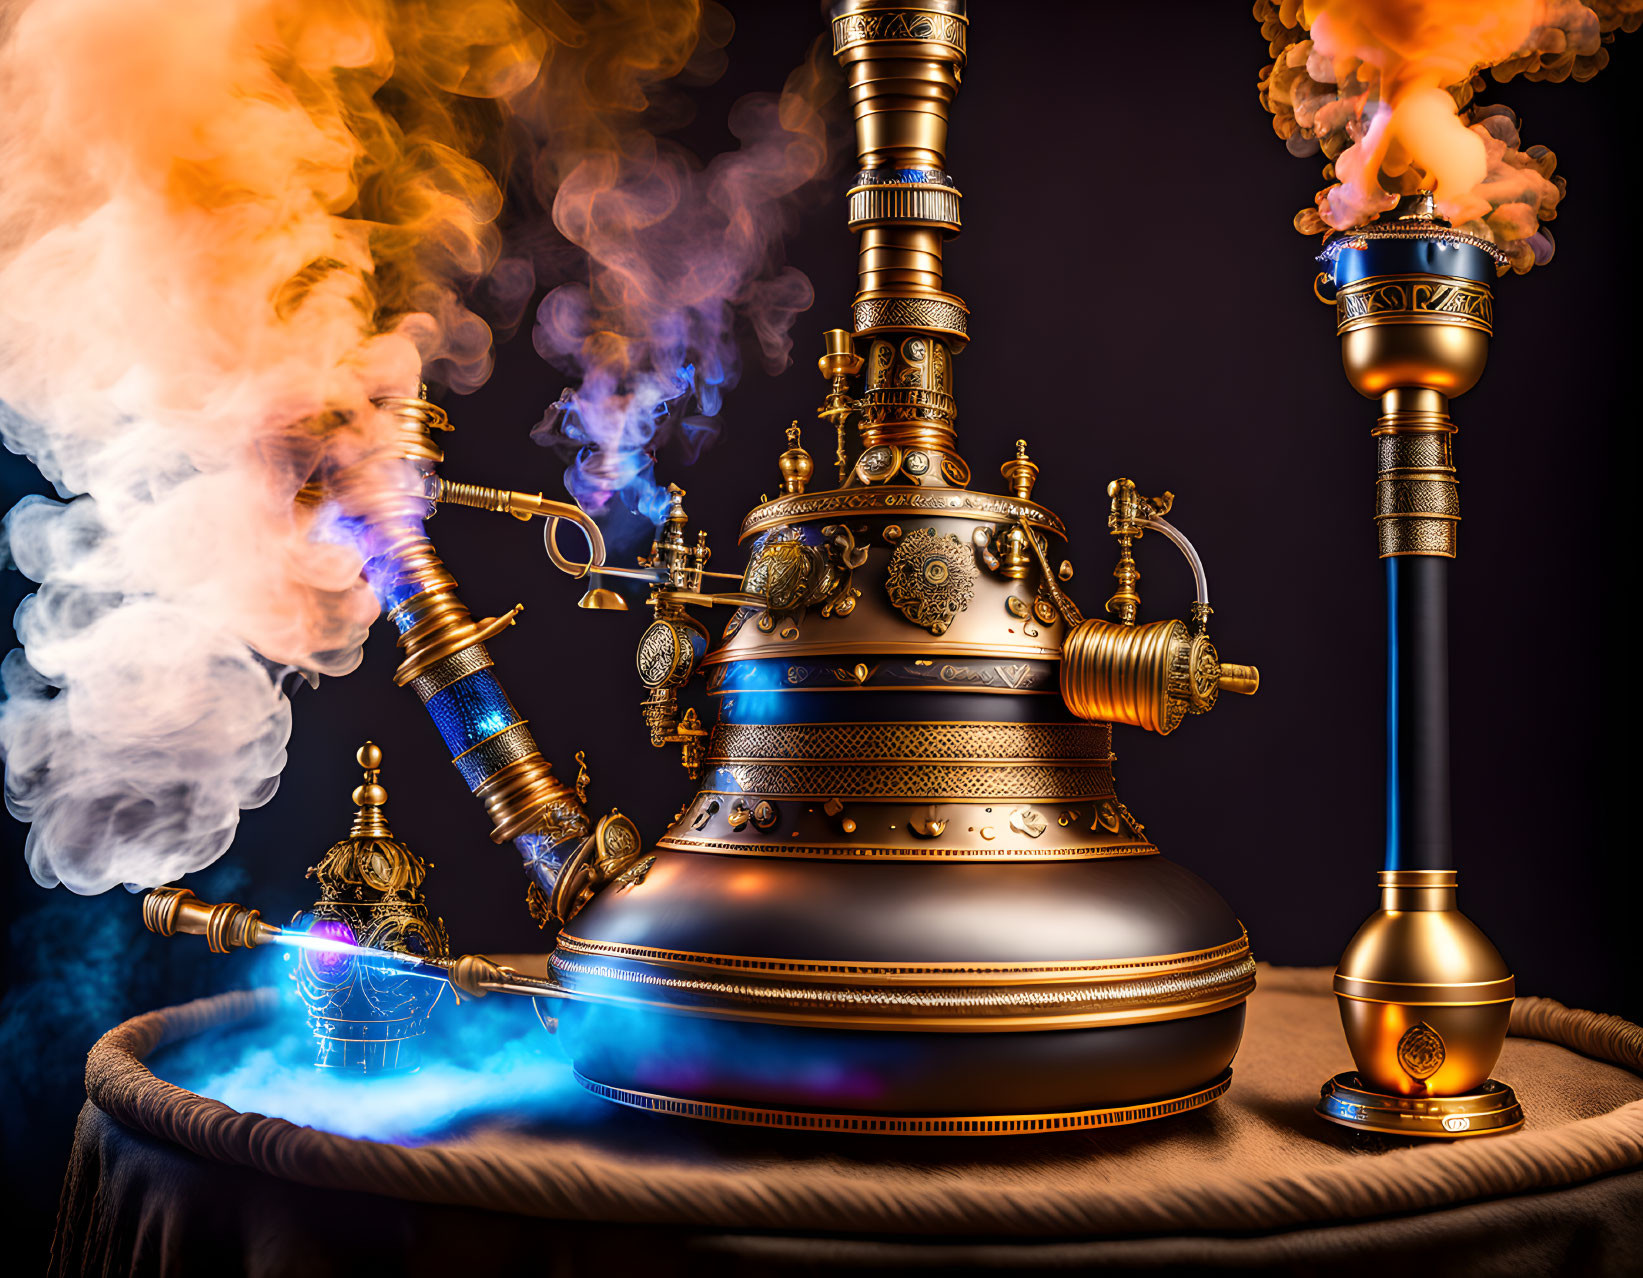 Traditional Hookah with Smoke on Dark Background and Colored Lighting